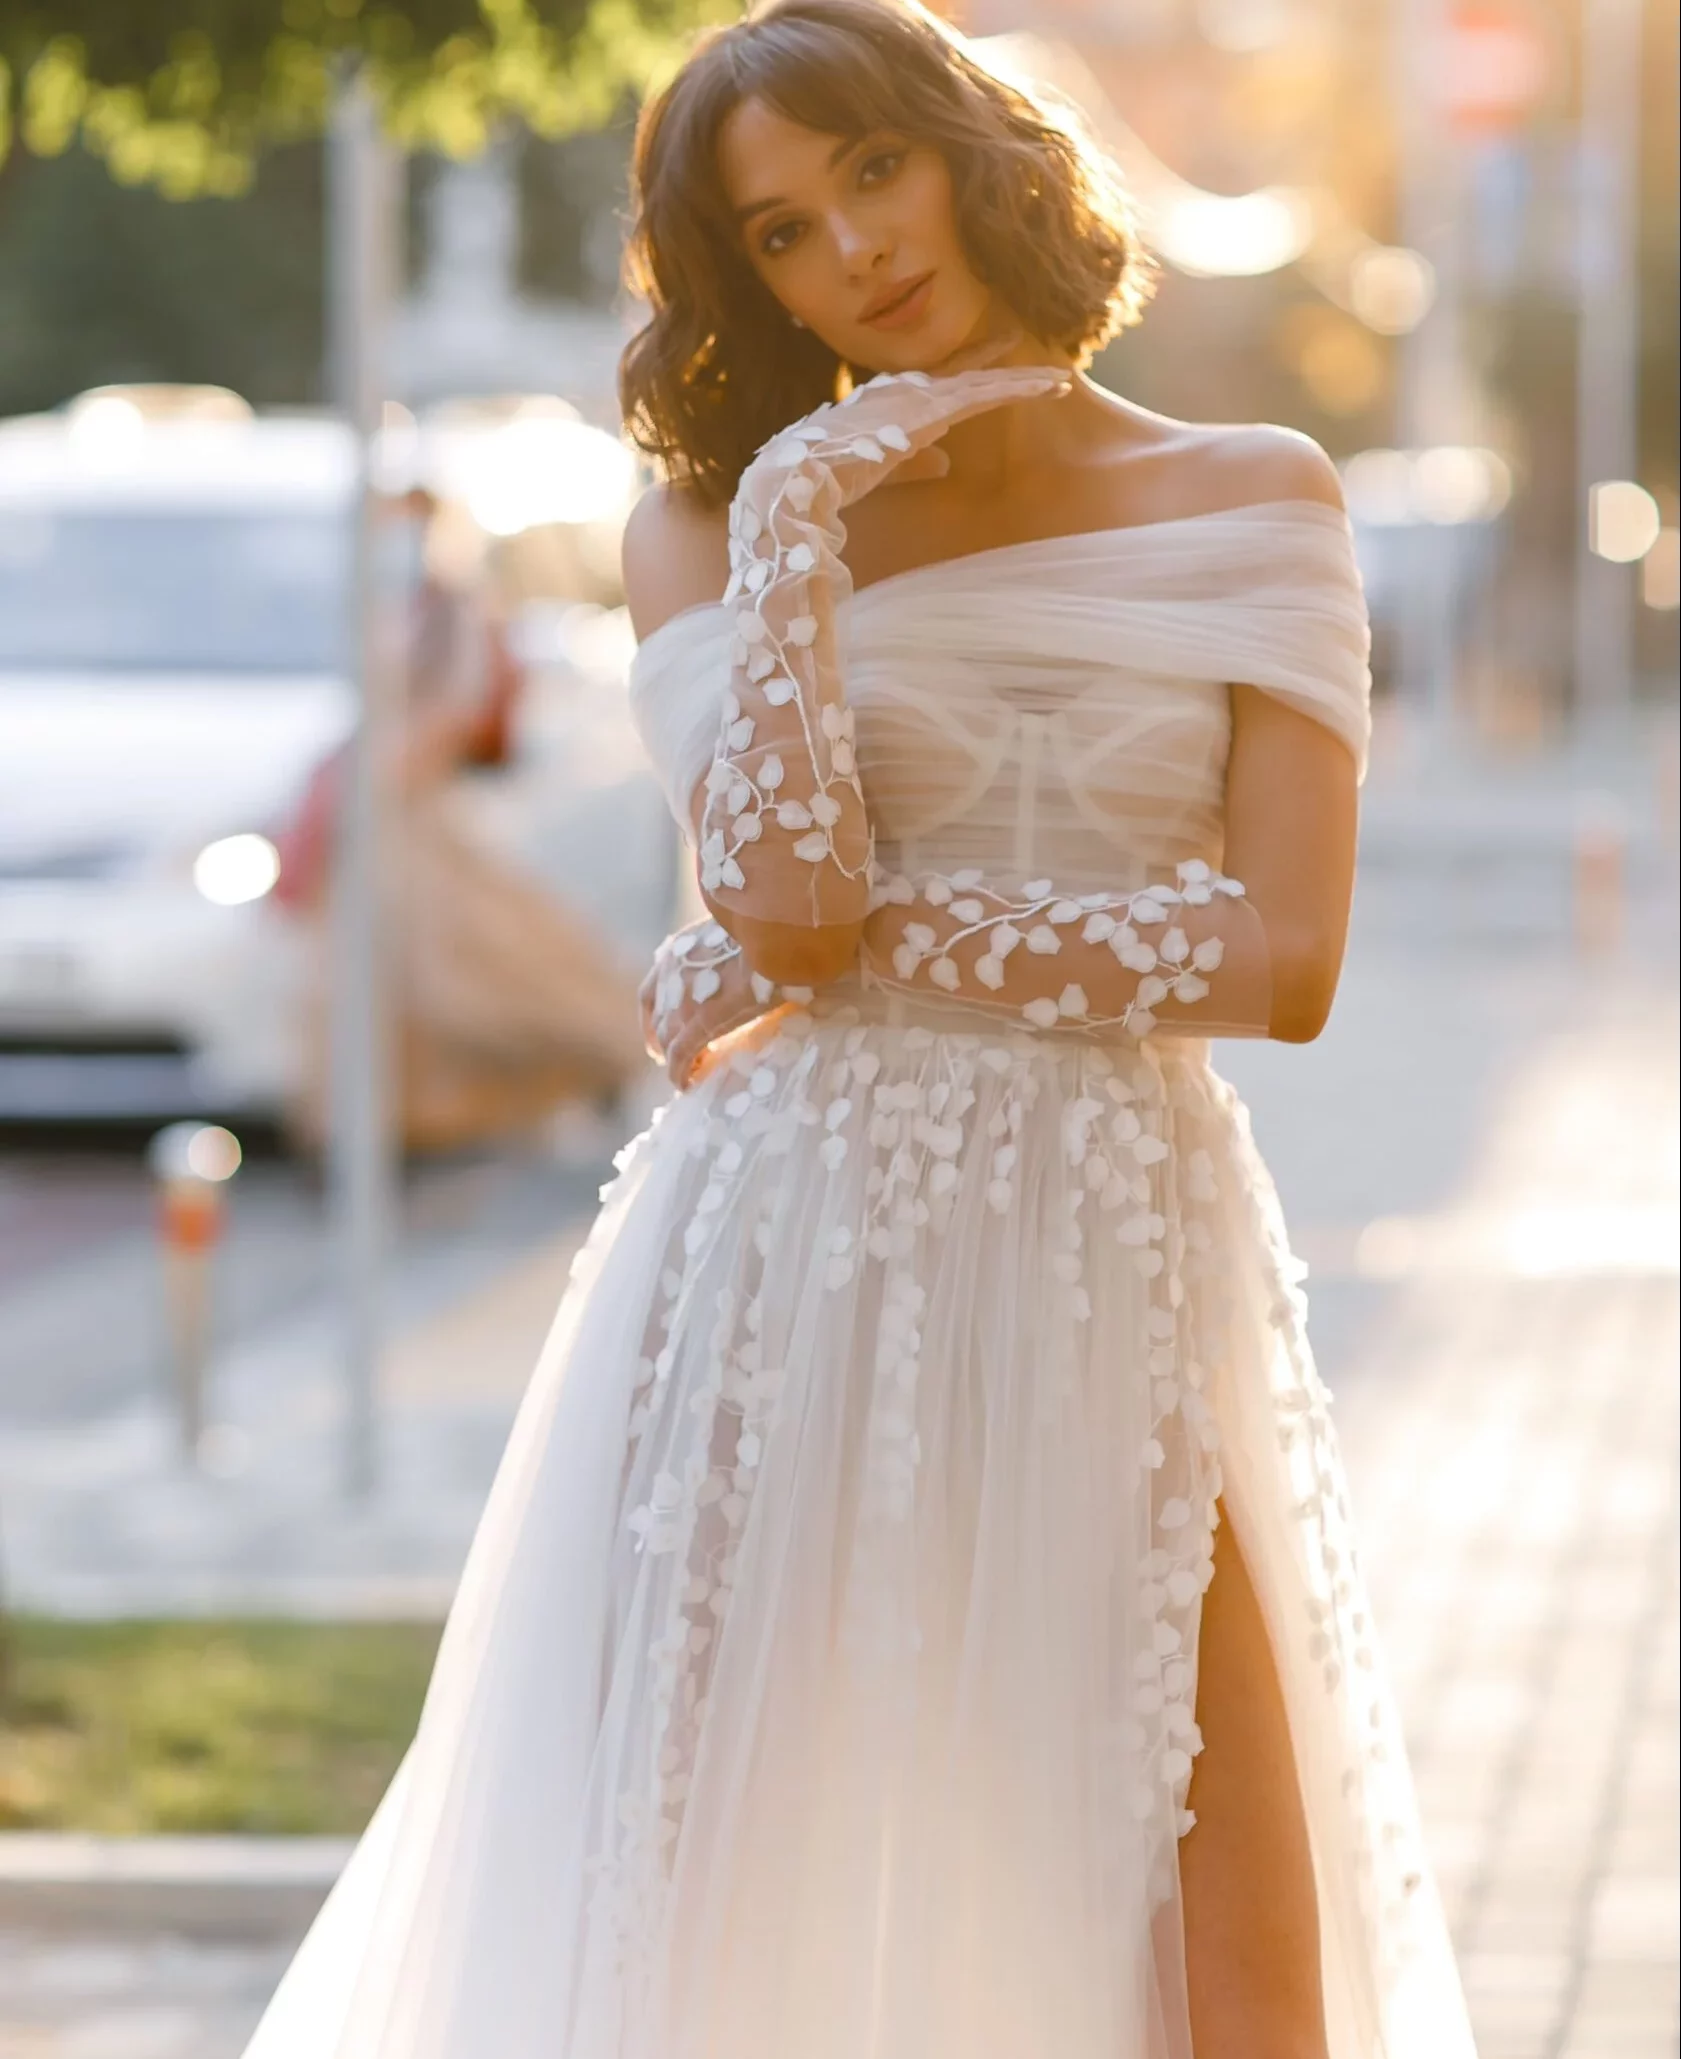 Bring your princess wedding fantasies to life with these modern ball gowns!  - Viero Bridal